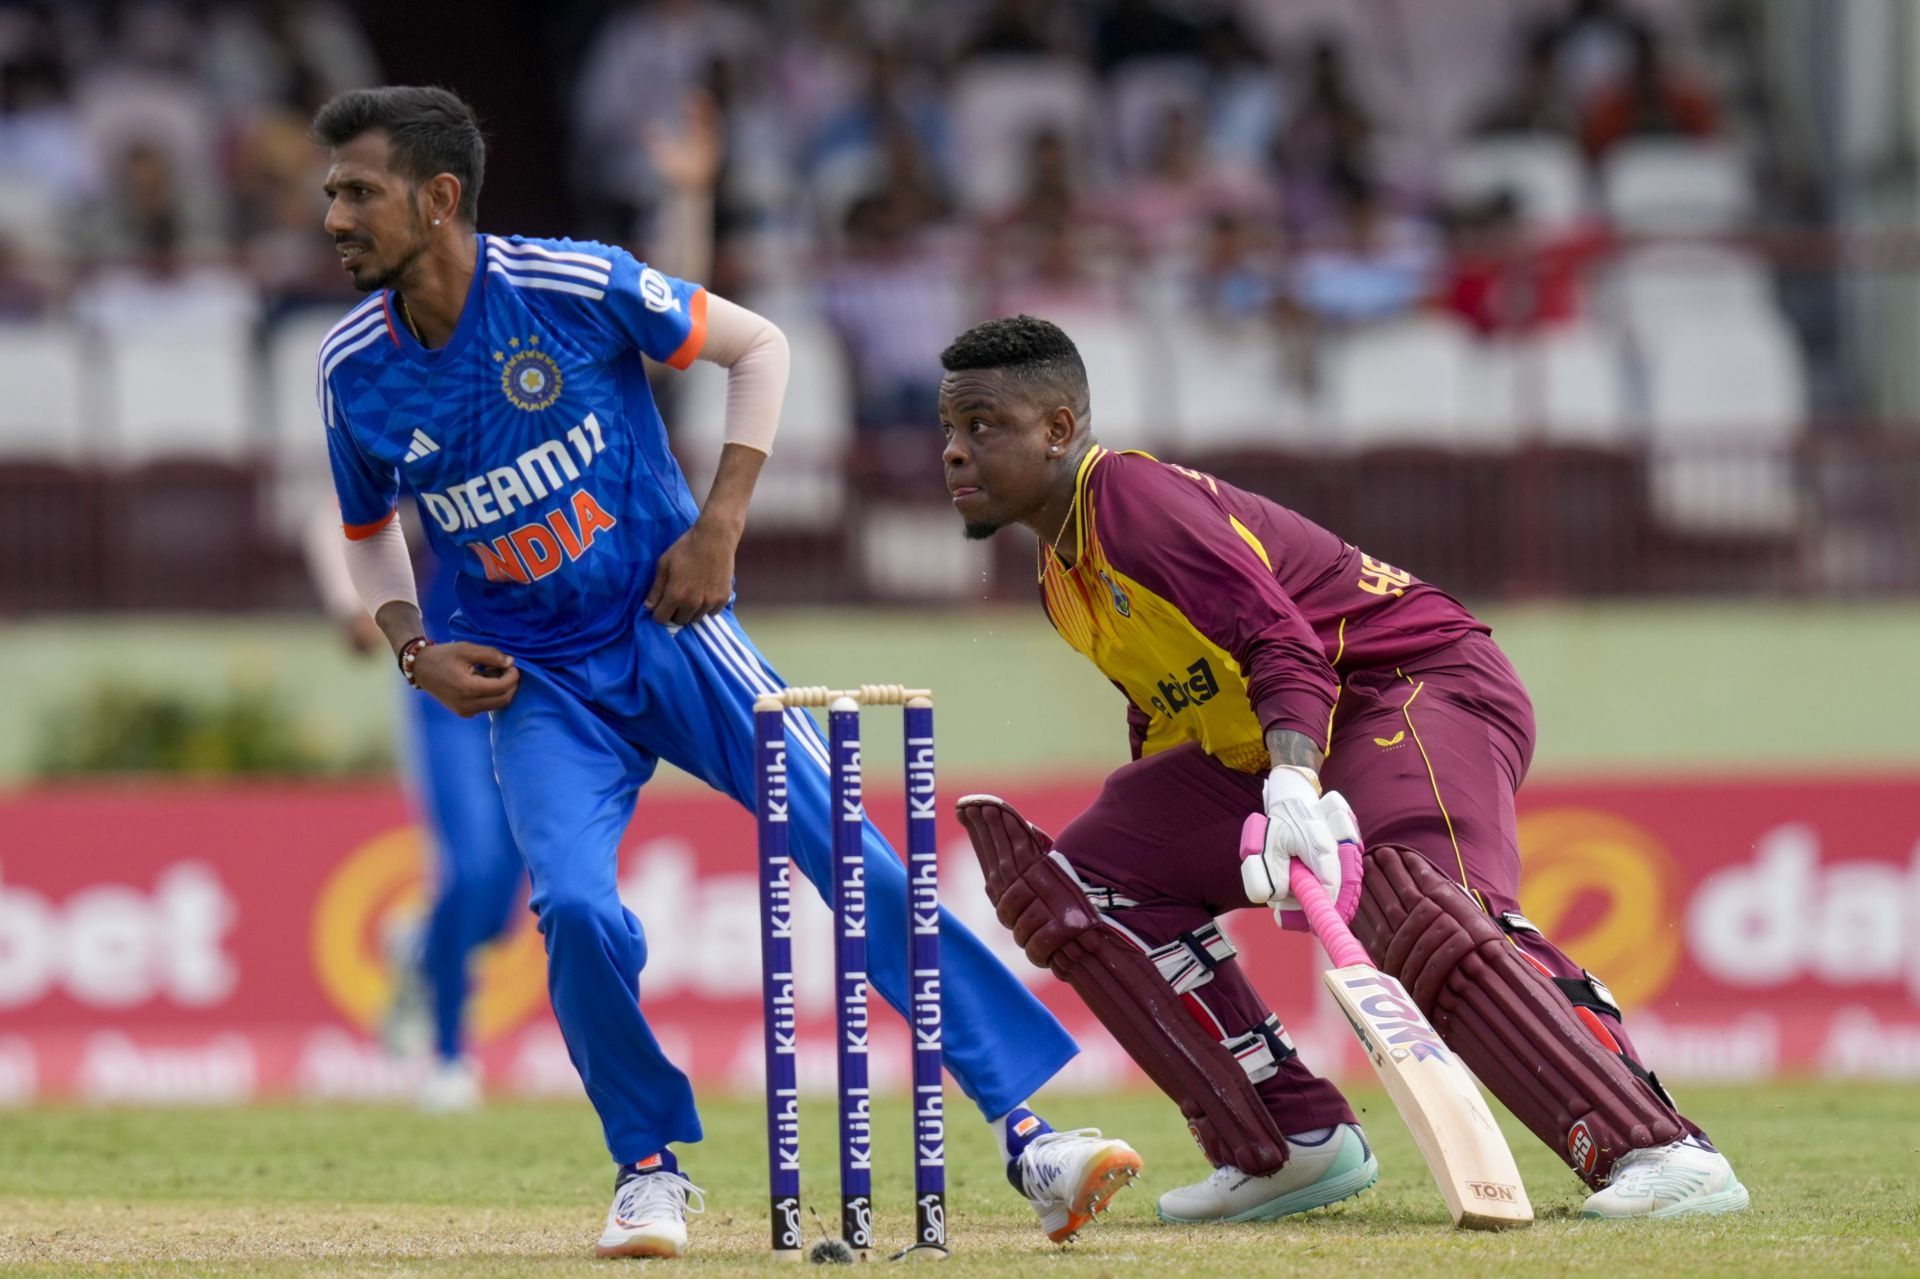 Chahal was a part of the Indian team that toured West Indies (Image: Getty)